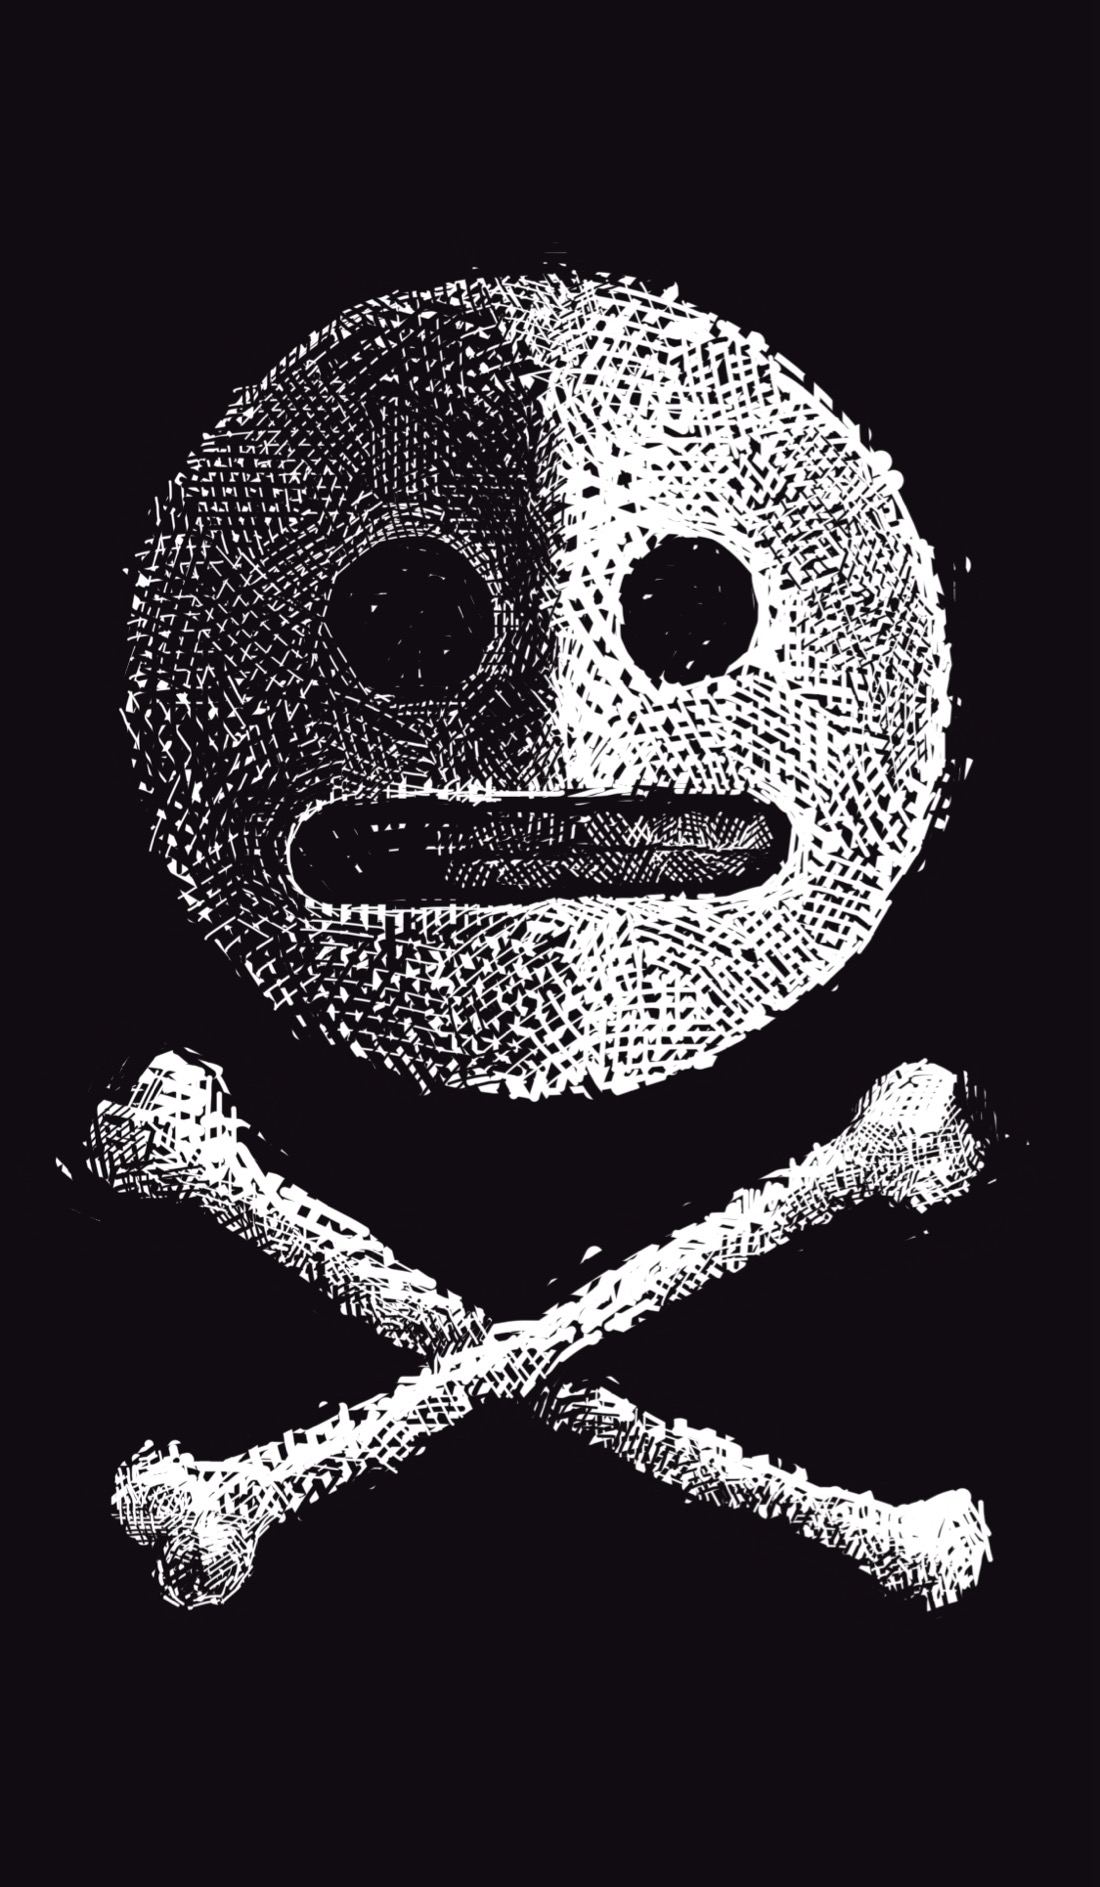 A skull and crossbones, except the skull is that "grimace" emoji: a round face with two dots for eyes and a mouth in a straight, horizontal line showing teeth. The face and bones are white, on a black background.